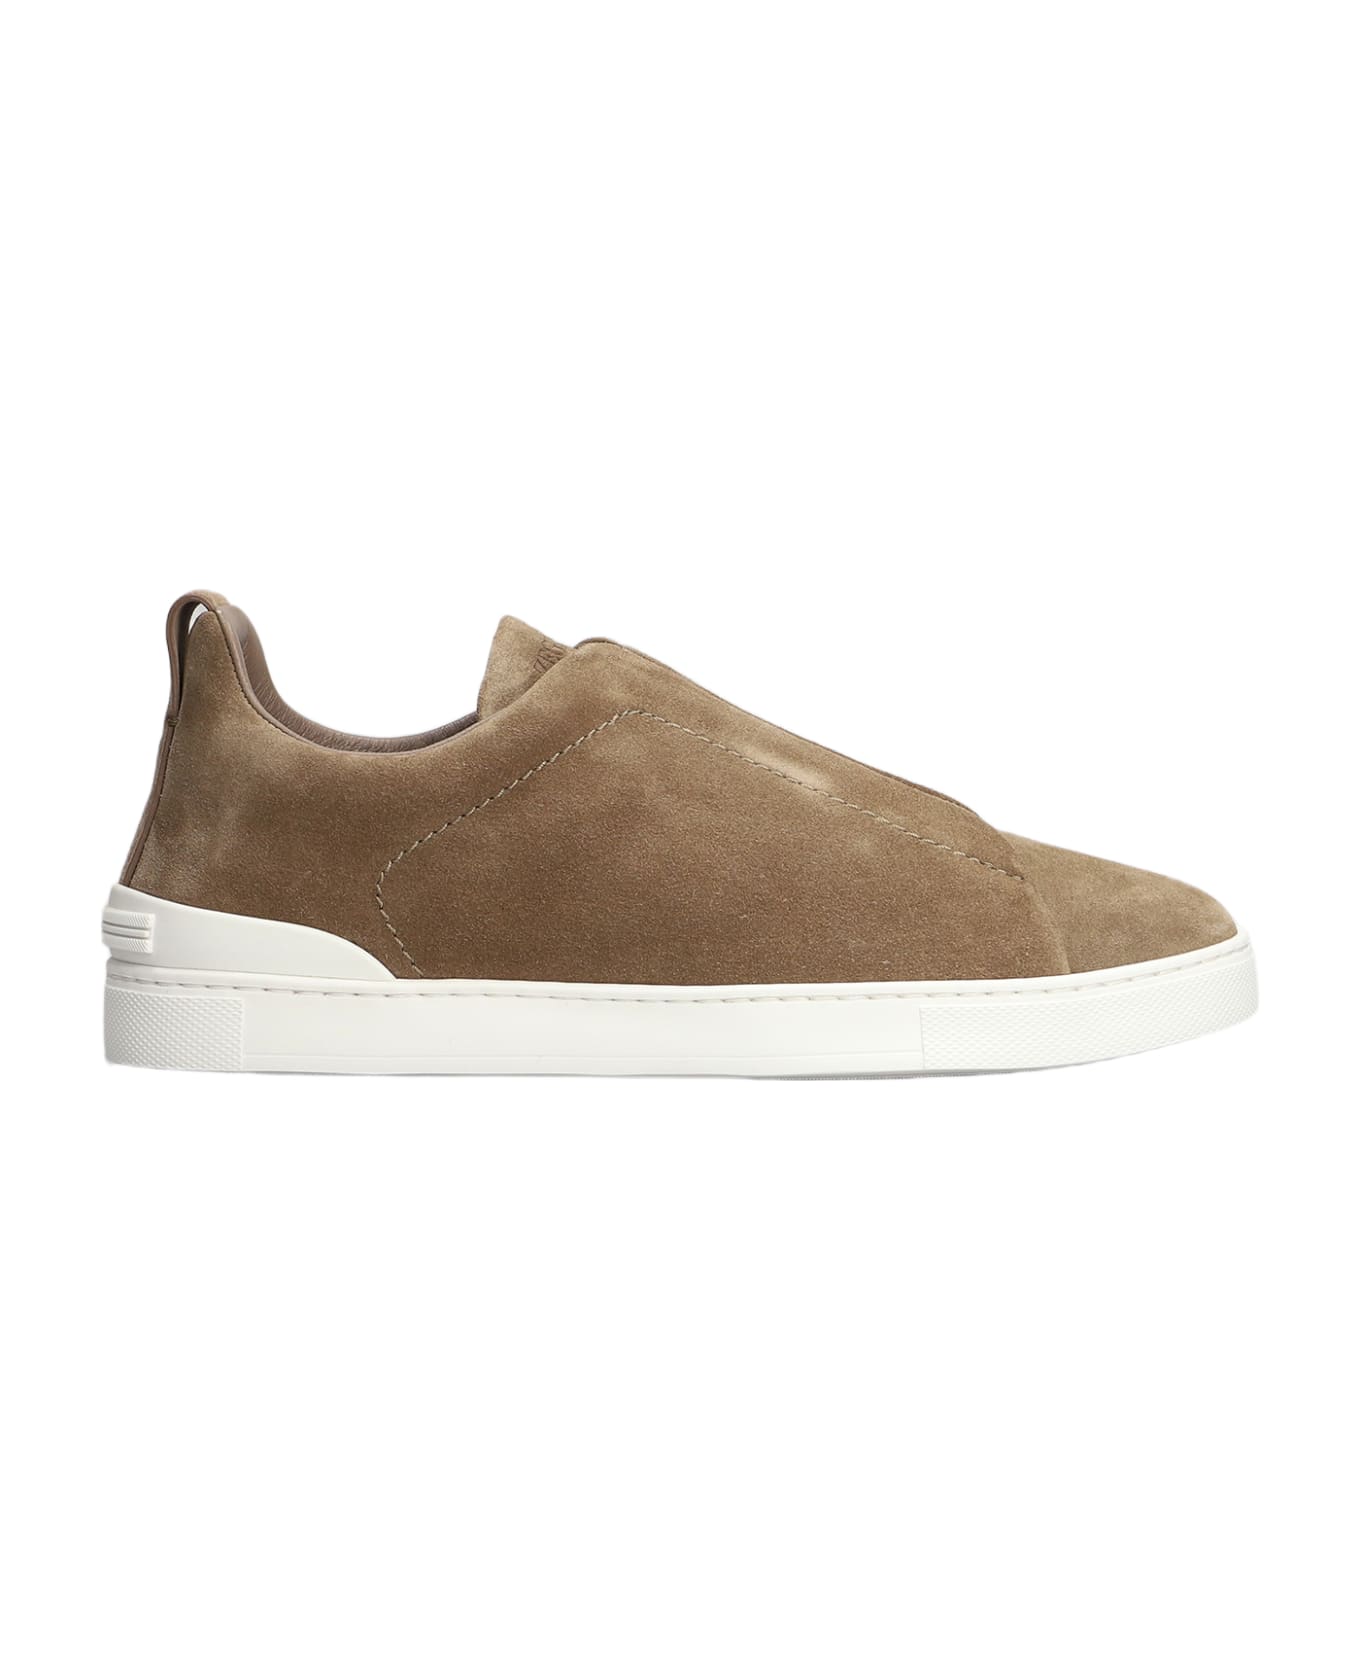 Zegna Triple Stich Sneakers In Camel Suede - Camel スニーカー